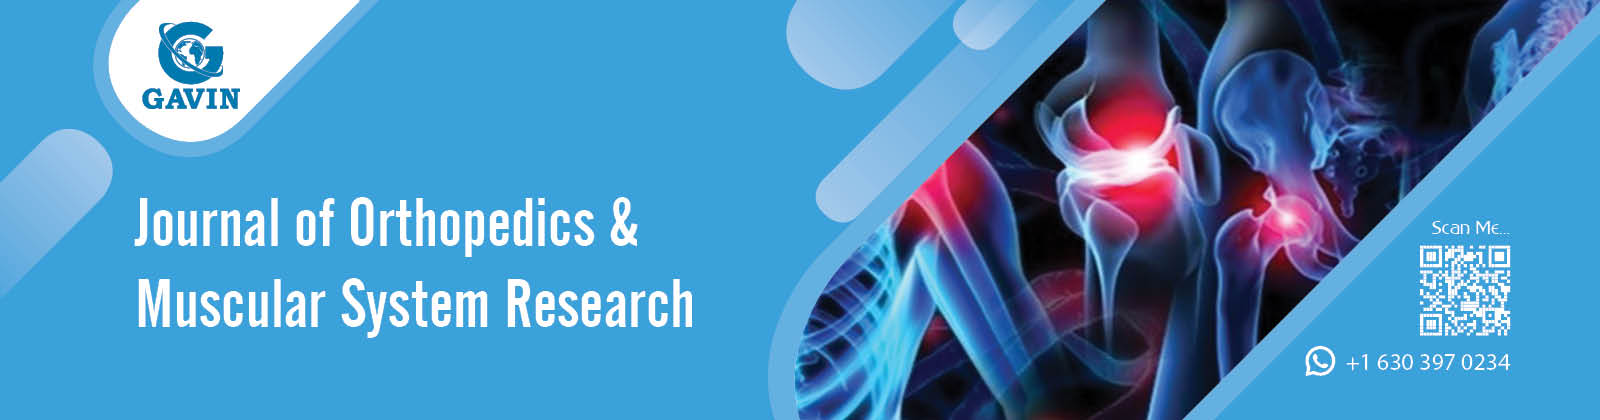 Journal of Orthopedics & Muscular System Research